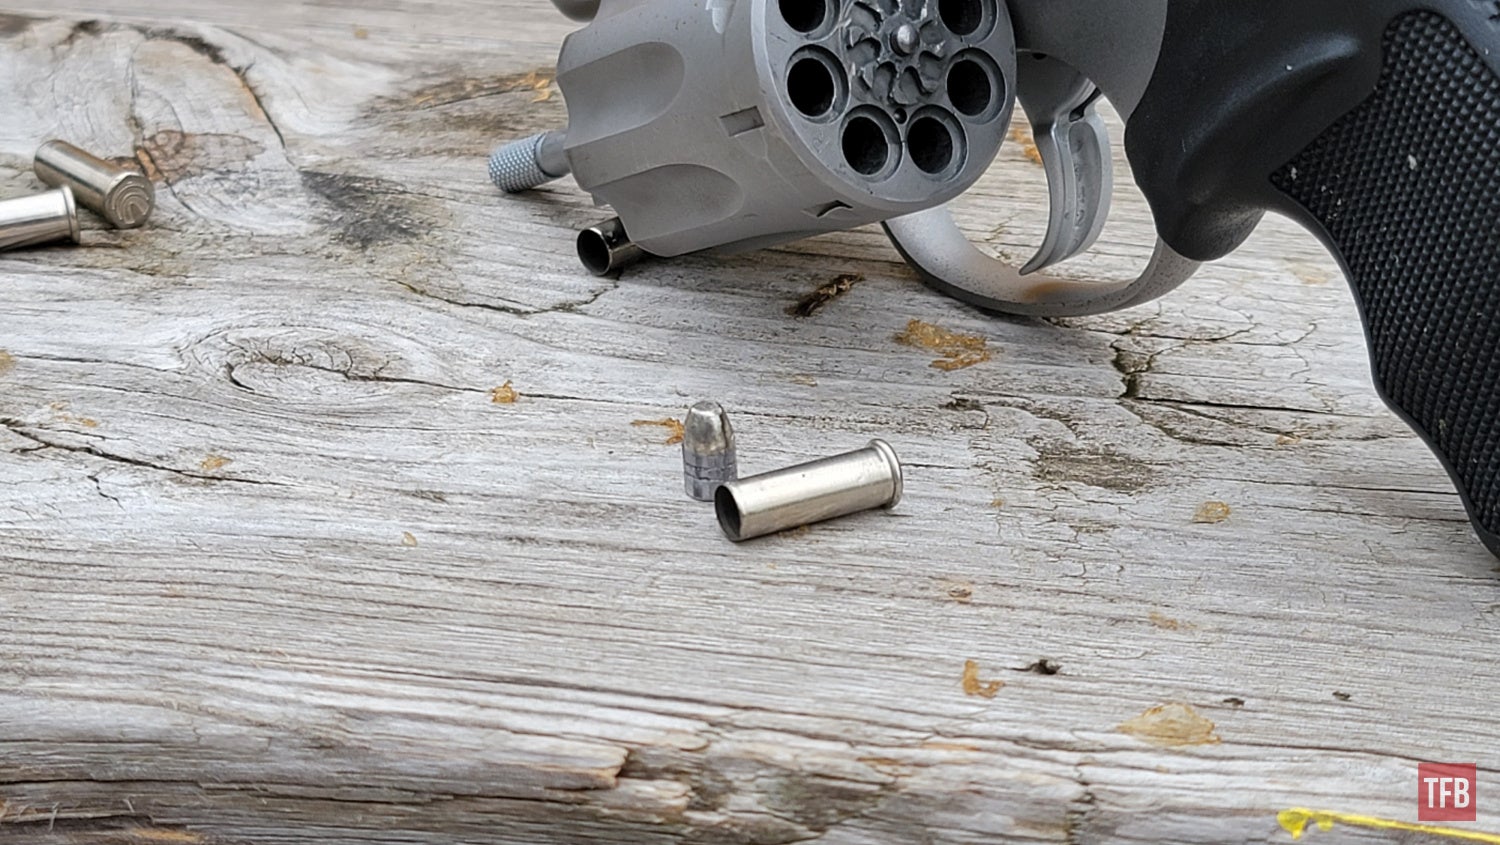 The Rimfire Report: Federal 22LR Punch Out of A 10/22 - More Effective?